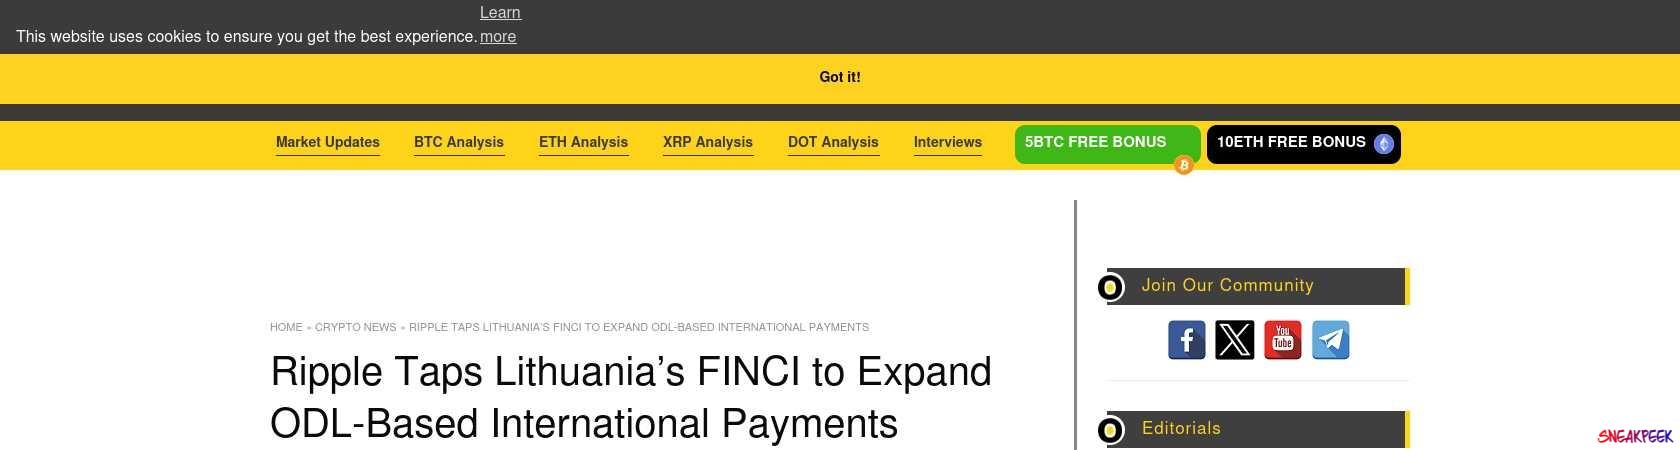 Read the full Article:  ⭲ Ripple Taps Lithuania’s FINCI to Expand ODL-Based International Payments 